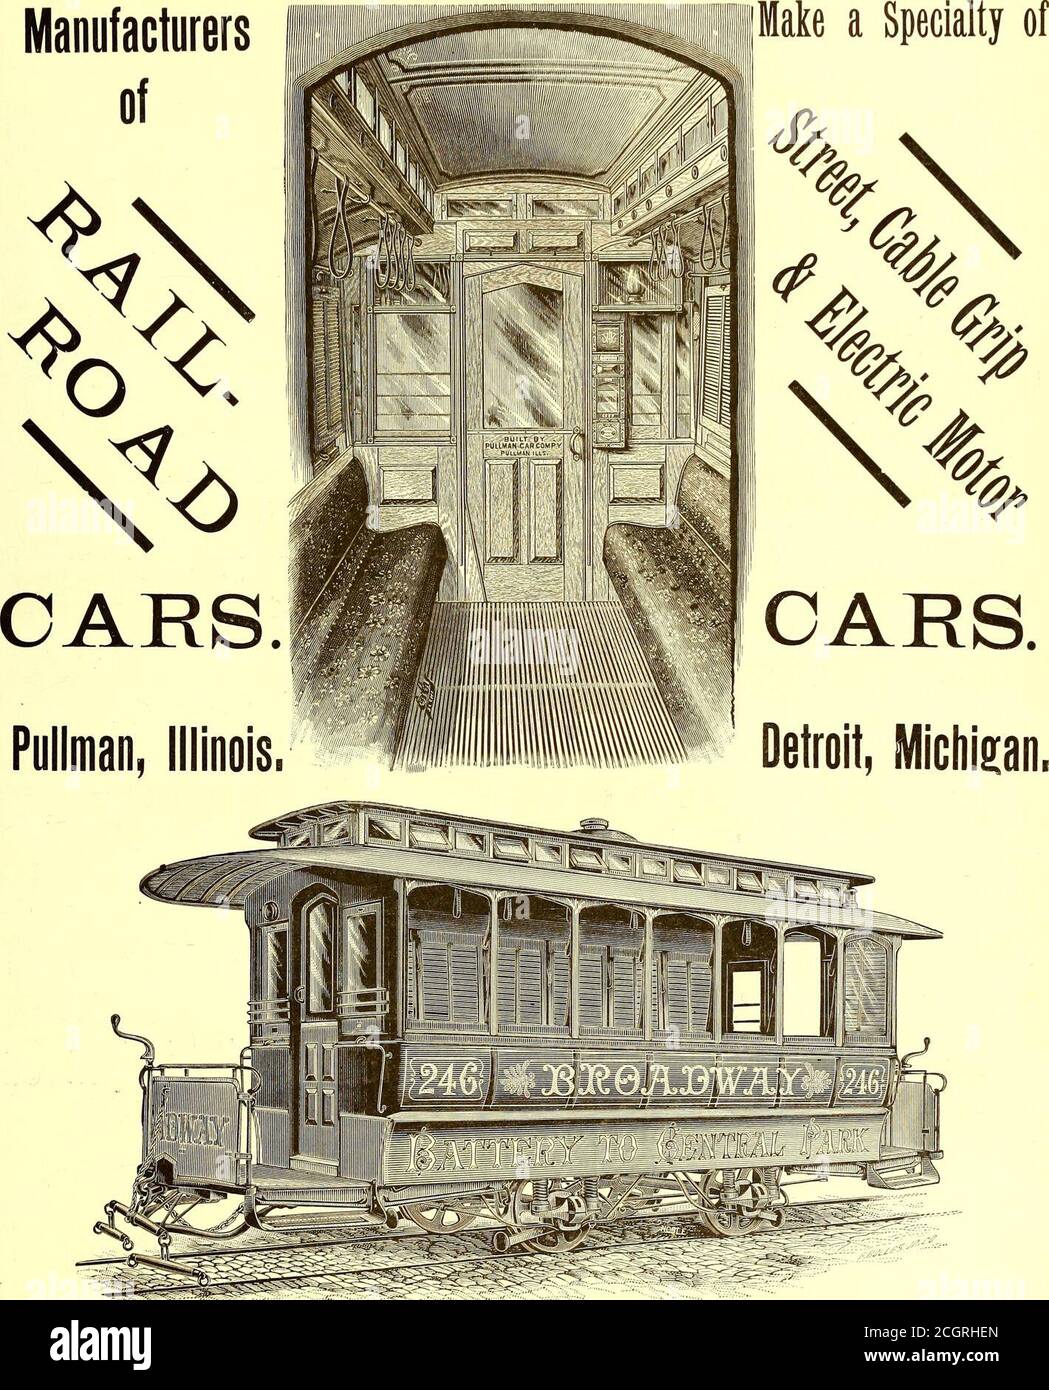 . The Street railway journal . OF THE Eureka Folding Mat. The Most Durable, Easiest Cleaned and Repaired Wood Matever made. I would respectfully call the attention or Managers of Street Railways tomy latest Improved Reversible Folding Mat, made to fit &ny size car. Sampleorder solicited. I 193 Broadway, New York. FACTORY—CRANFORU, N. J. ESTABLISHED 1857. INCORPORATED 1875. CAR COMPANY, ST. LOUIS, MO. BUILDERS OF Street Oars OF EVERY STYLE AND SIZE, For Horse, Cable or Other Motive Power. EXCLUSIVE MANUFACTURERS OF BROWNELLS PATENT COMBINATION CARS FOR SUMMER AND WINTER SERVICE. J. M. JONES SON Stock Photo